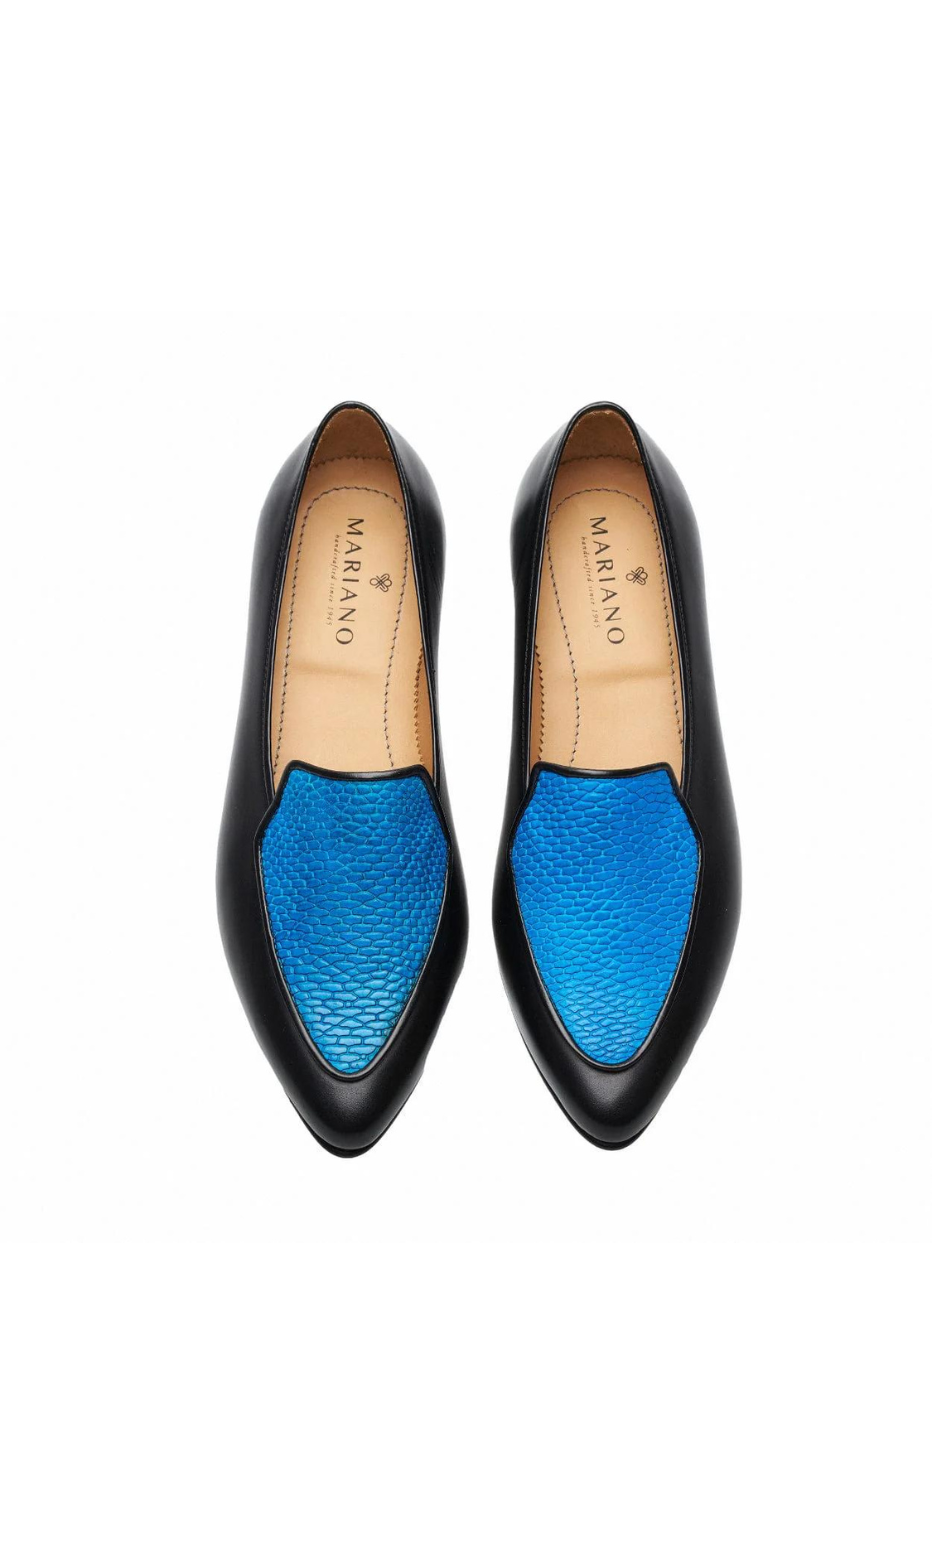 Classic Bicolor Loafer